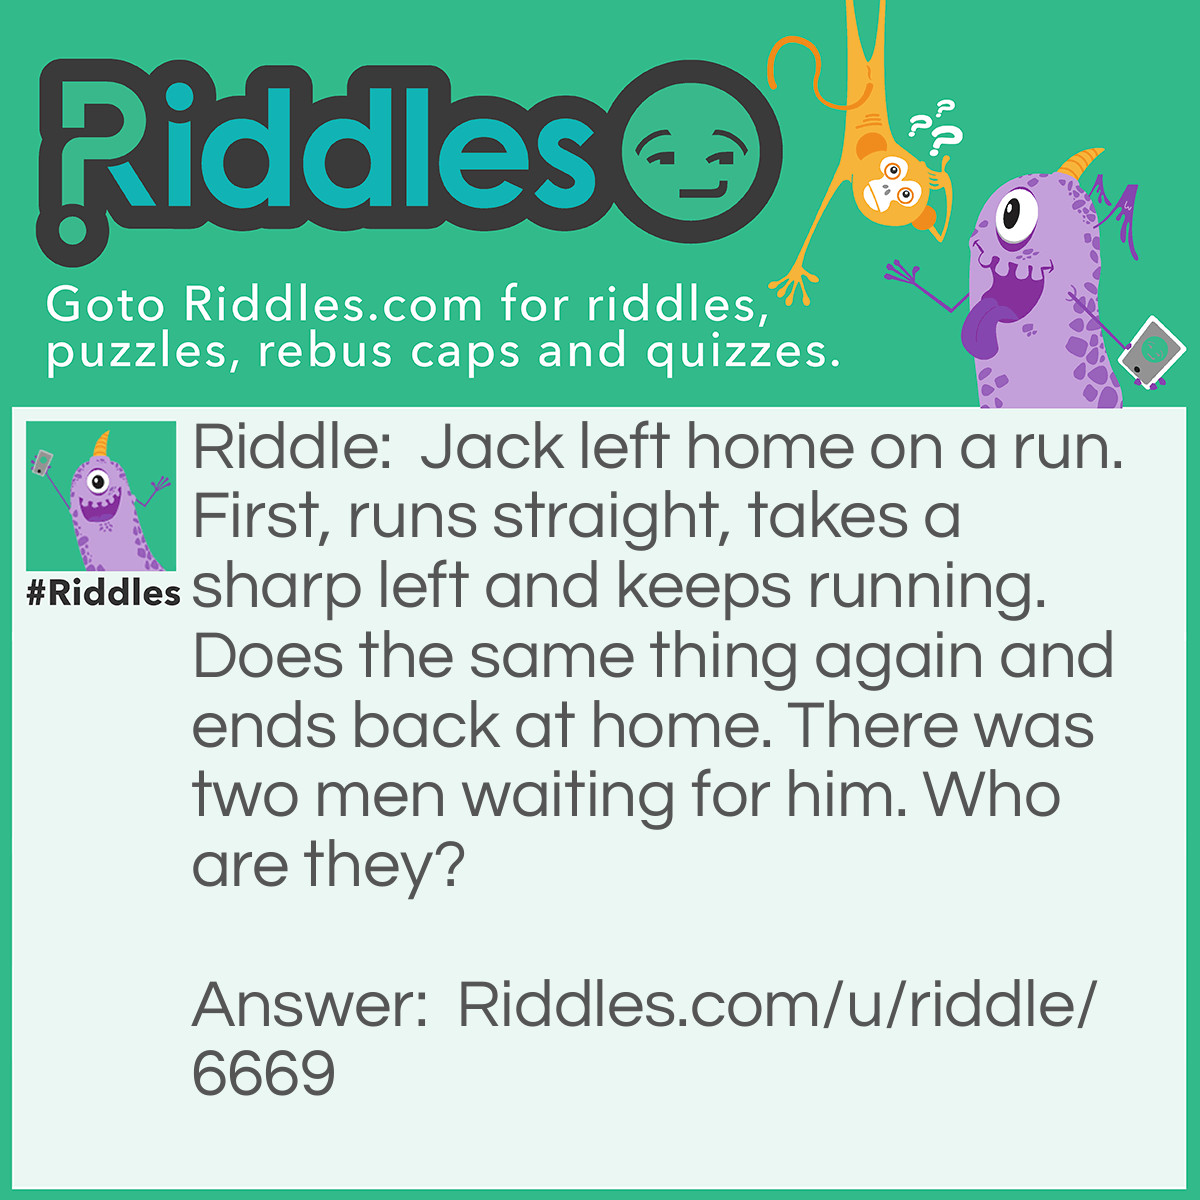 Riddle: Jack left home on a run. First, runs straight, takes a sharp left and keeps running. Does the same thing again and ends back at home. There was two men waiting for him. Who are they? Answer: The catcher and umpire (Jack is playing baseball)